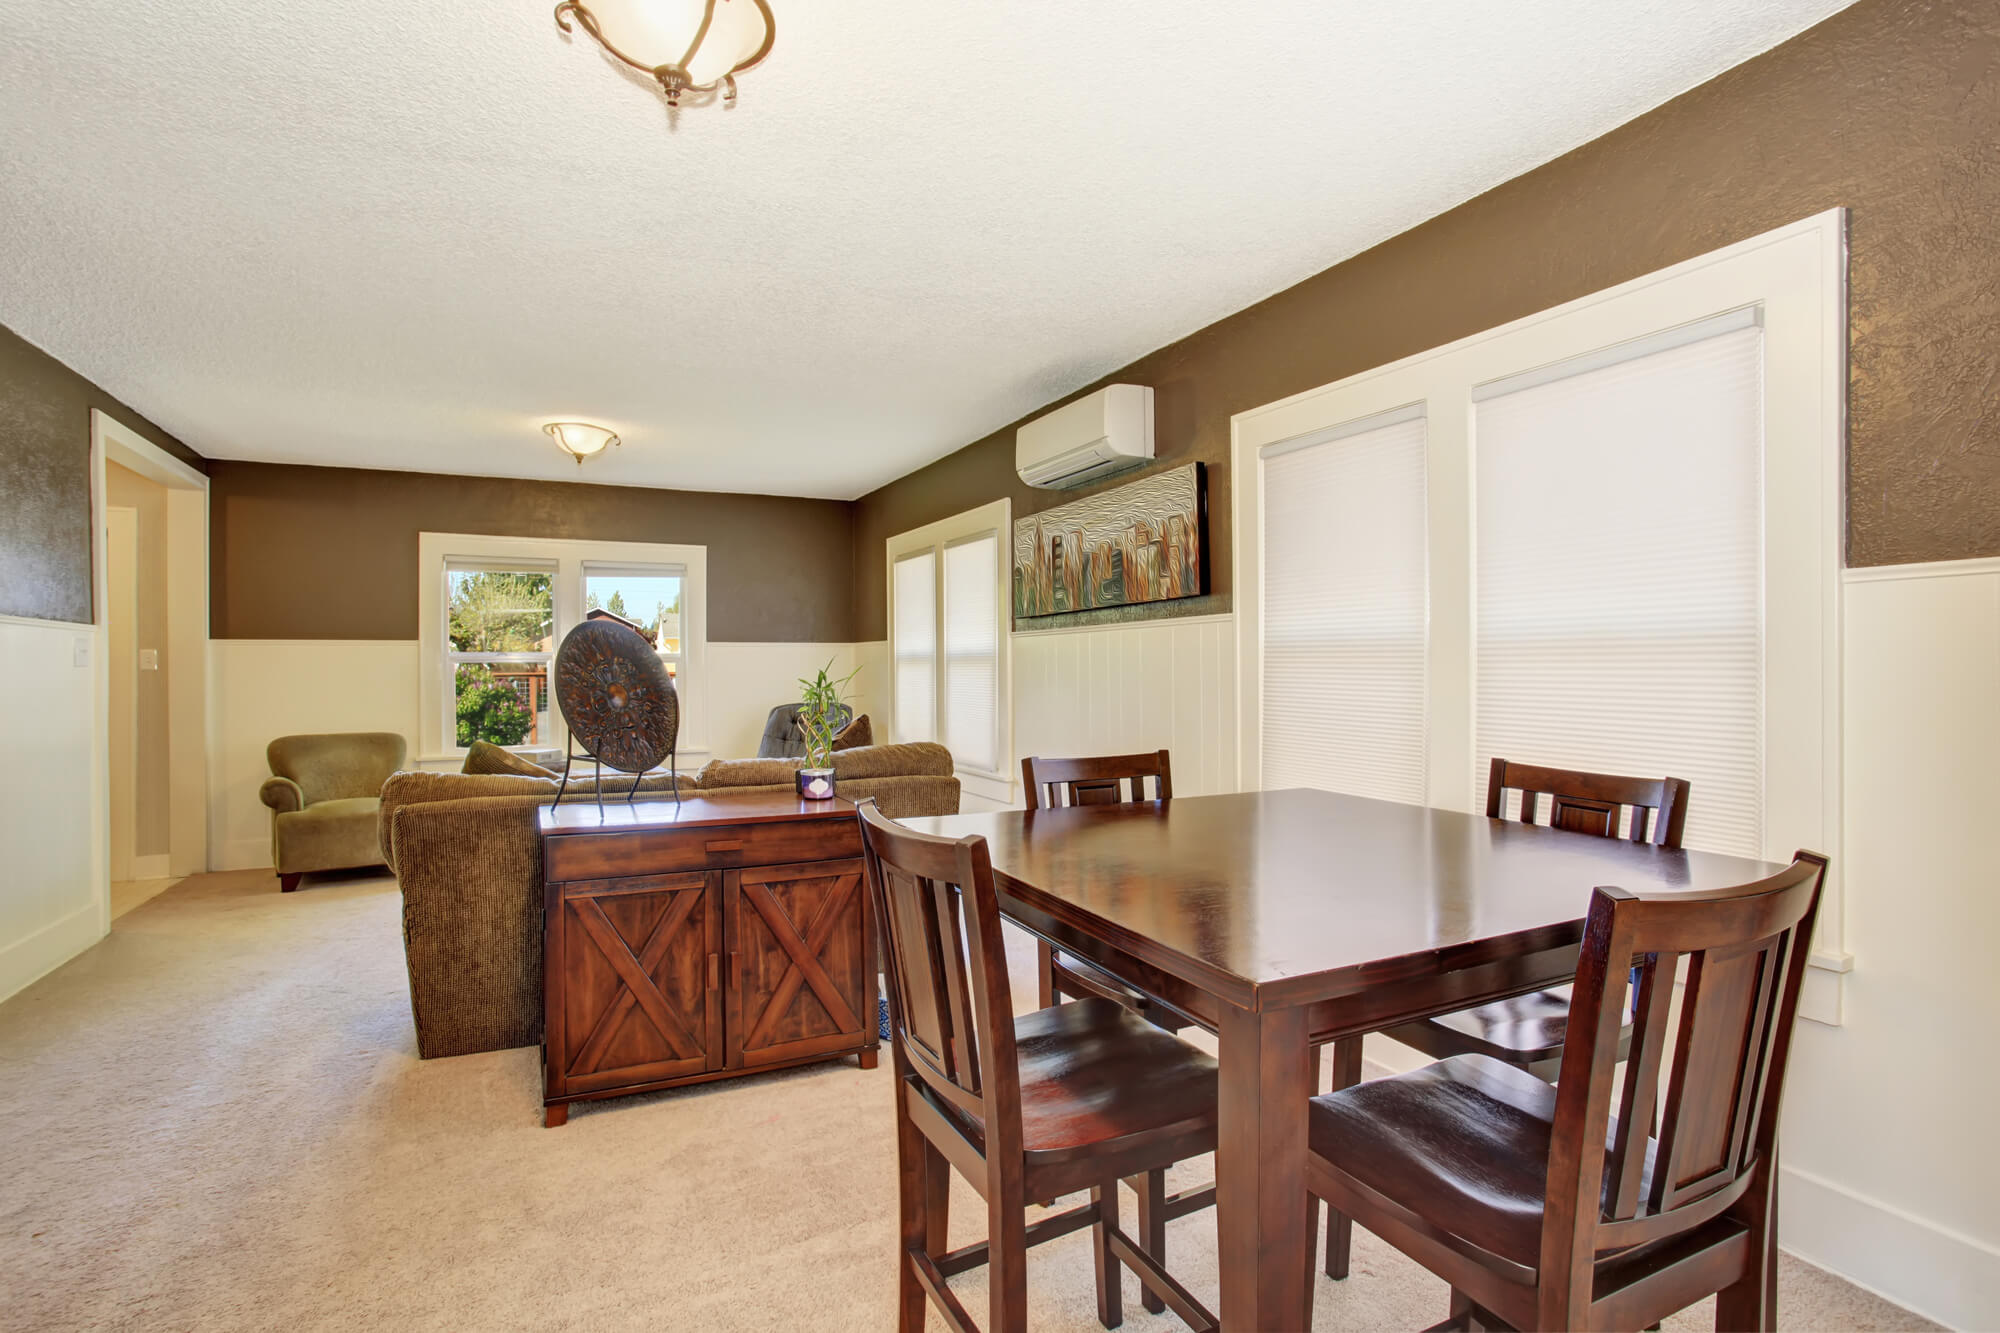 House Interior with sofa, dining table and chairs- Lawrence, KS house painters